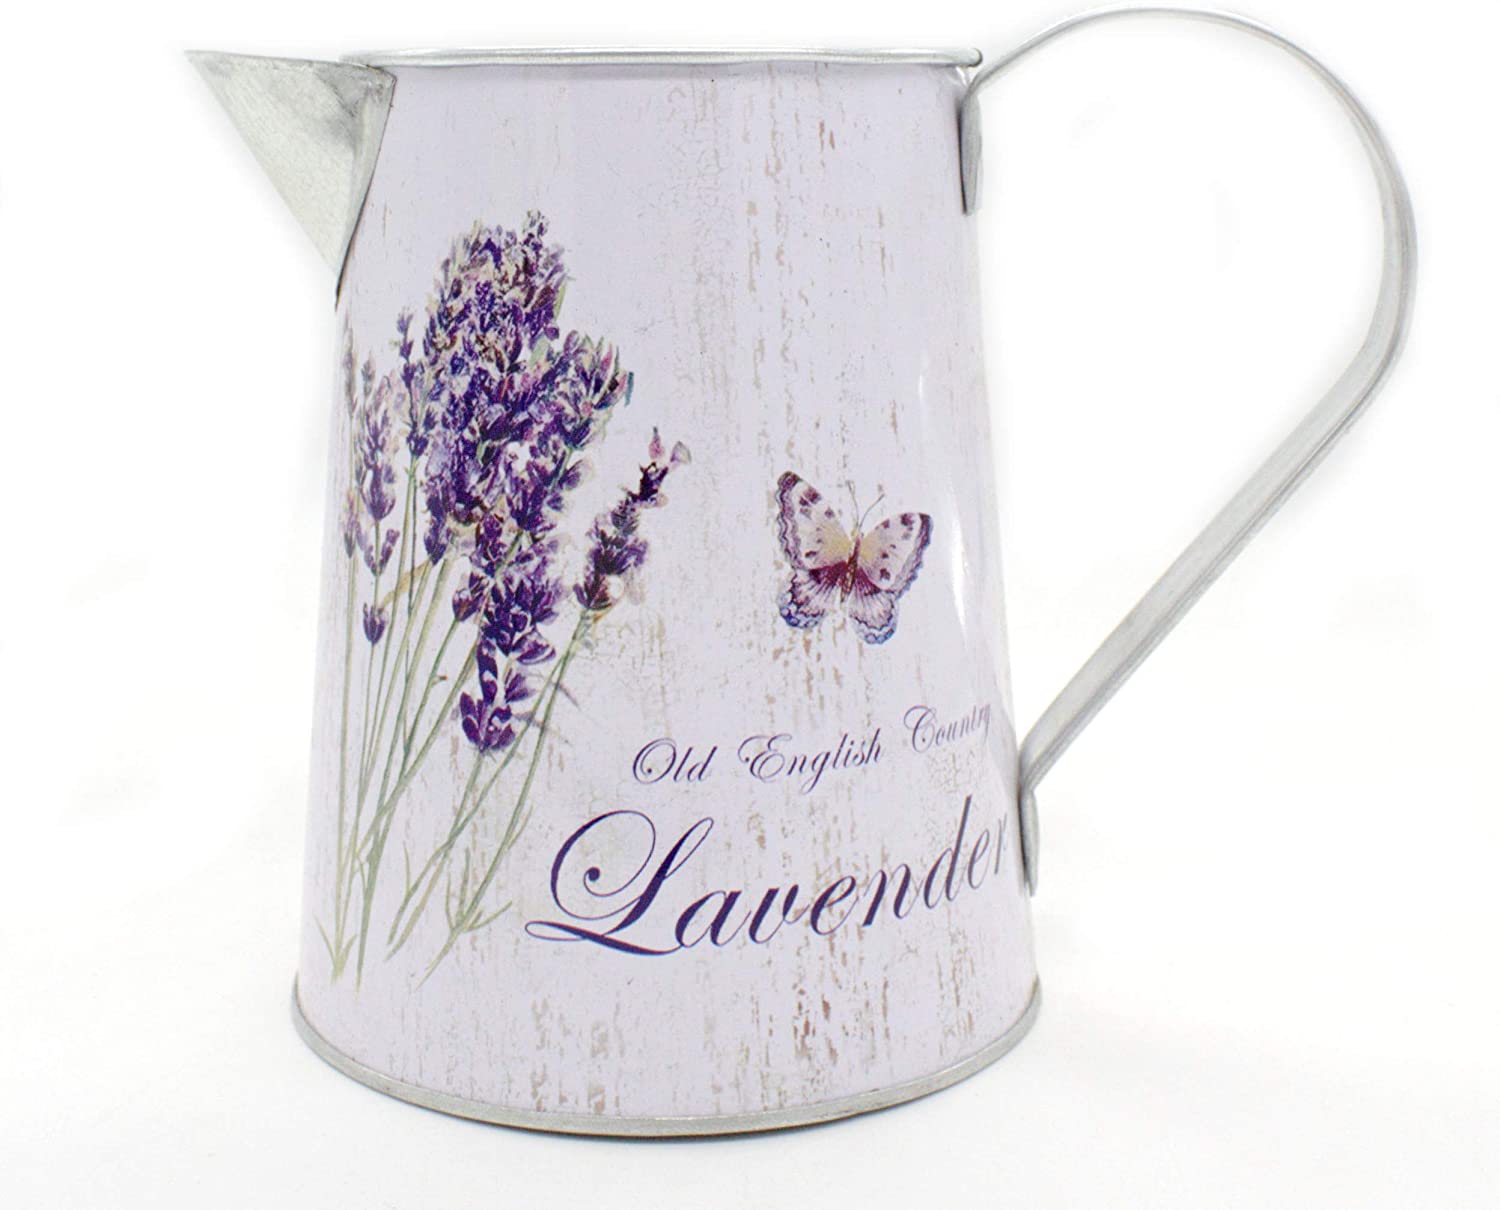 Daro Decorative Metal Jug 15 Cm High, Lavender And Butterfly